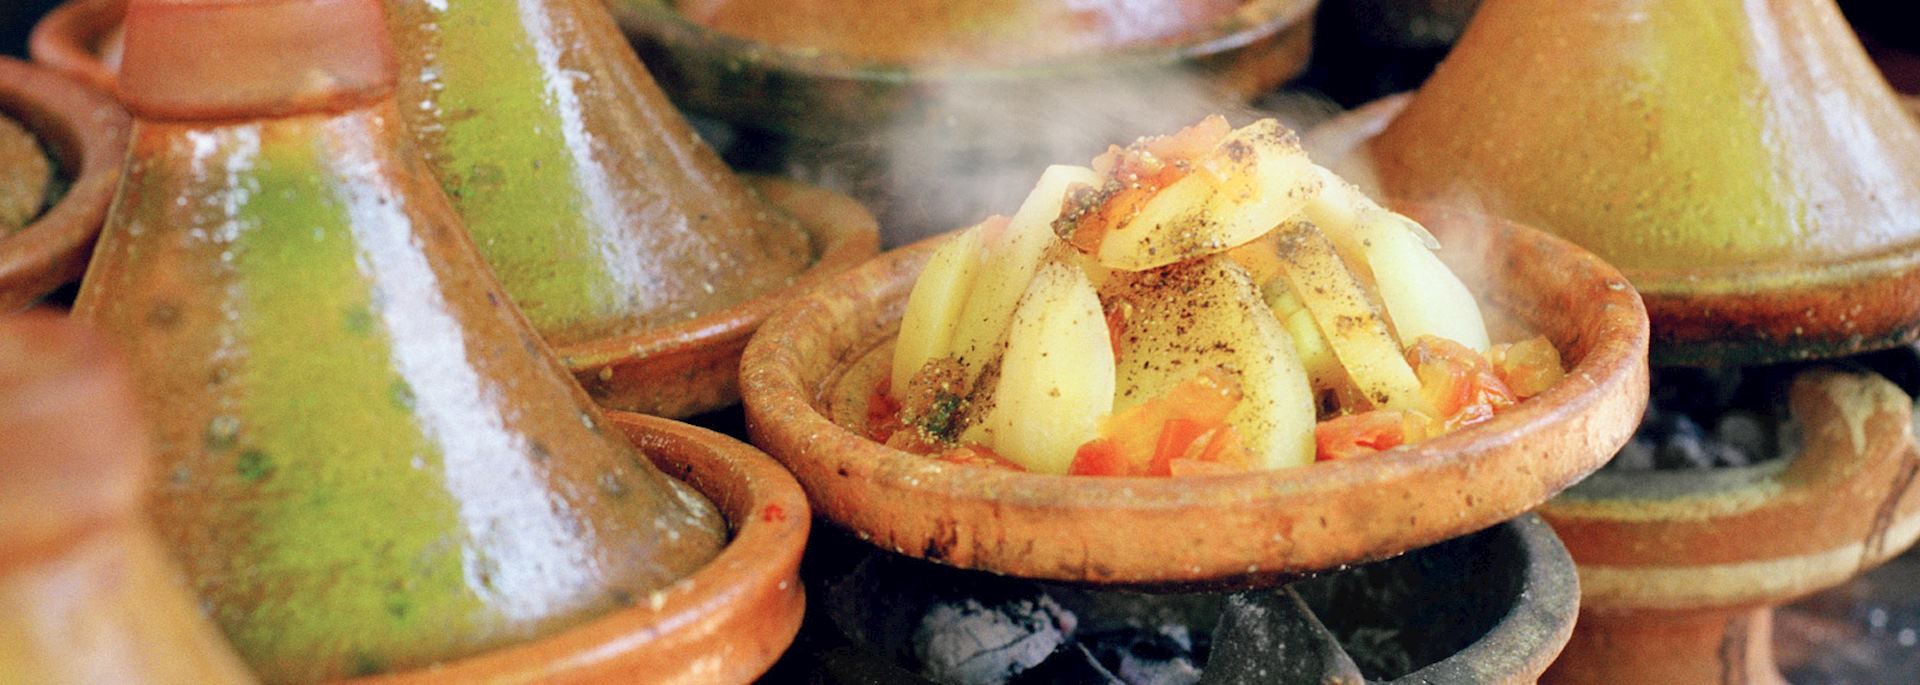 Cooking with tagines in Morocco